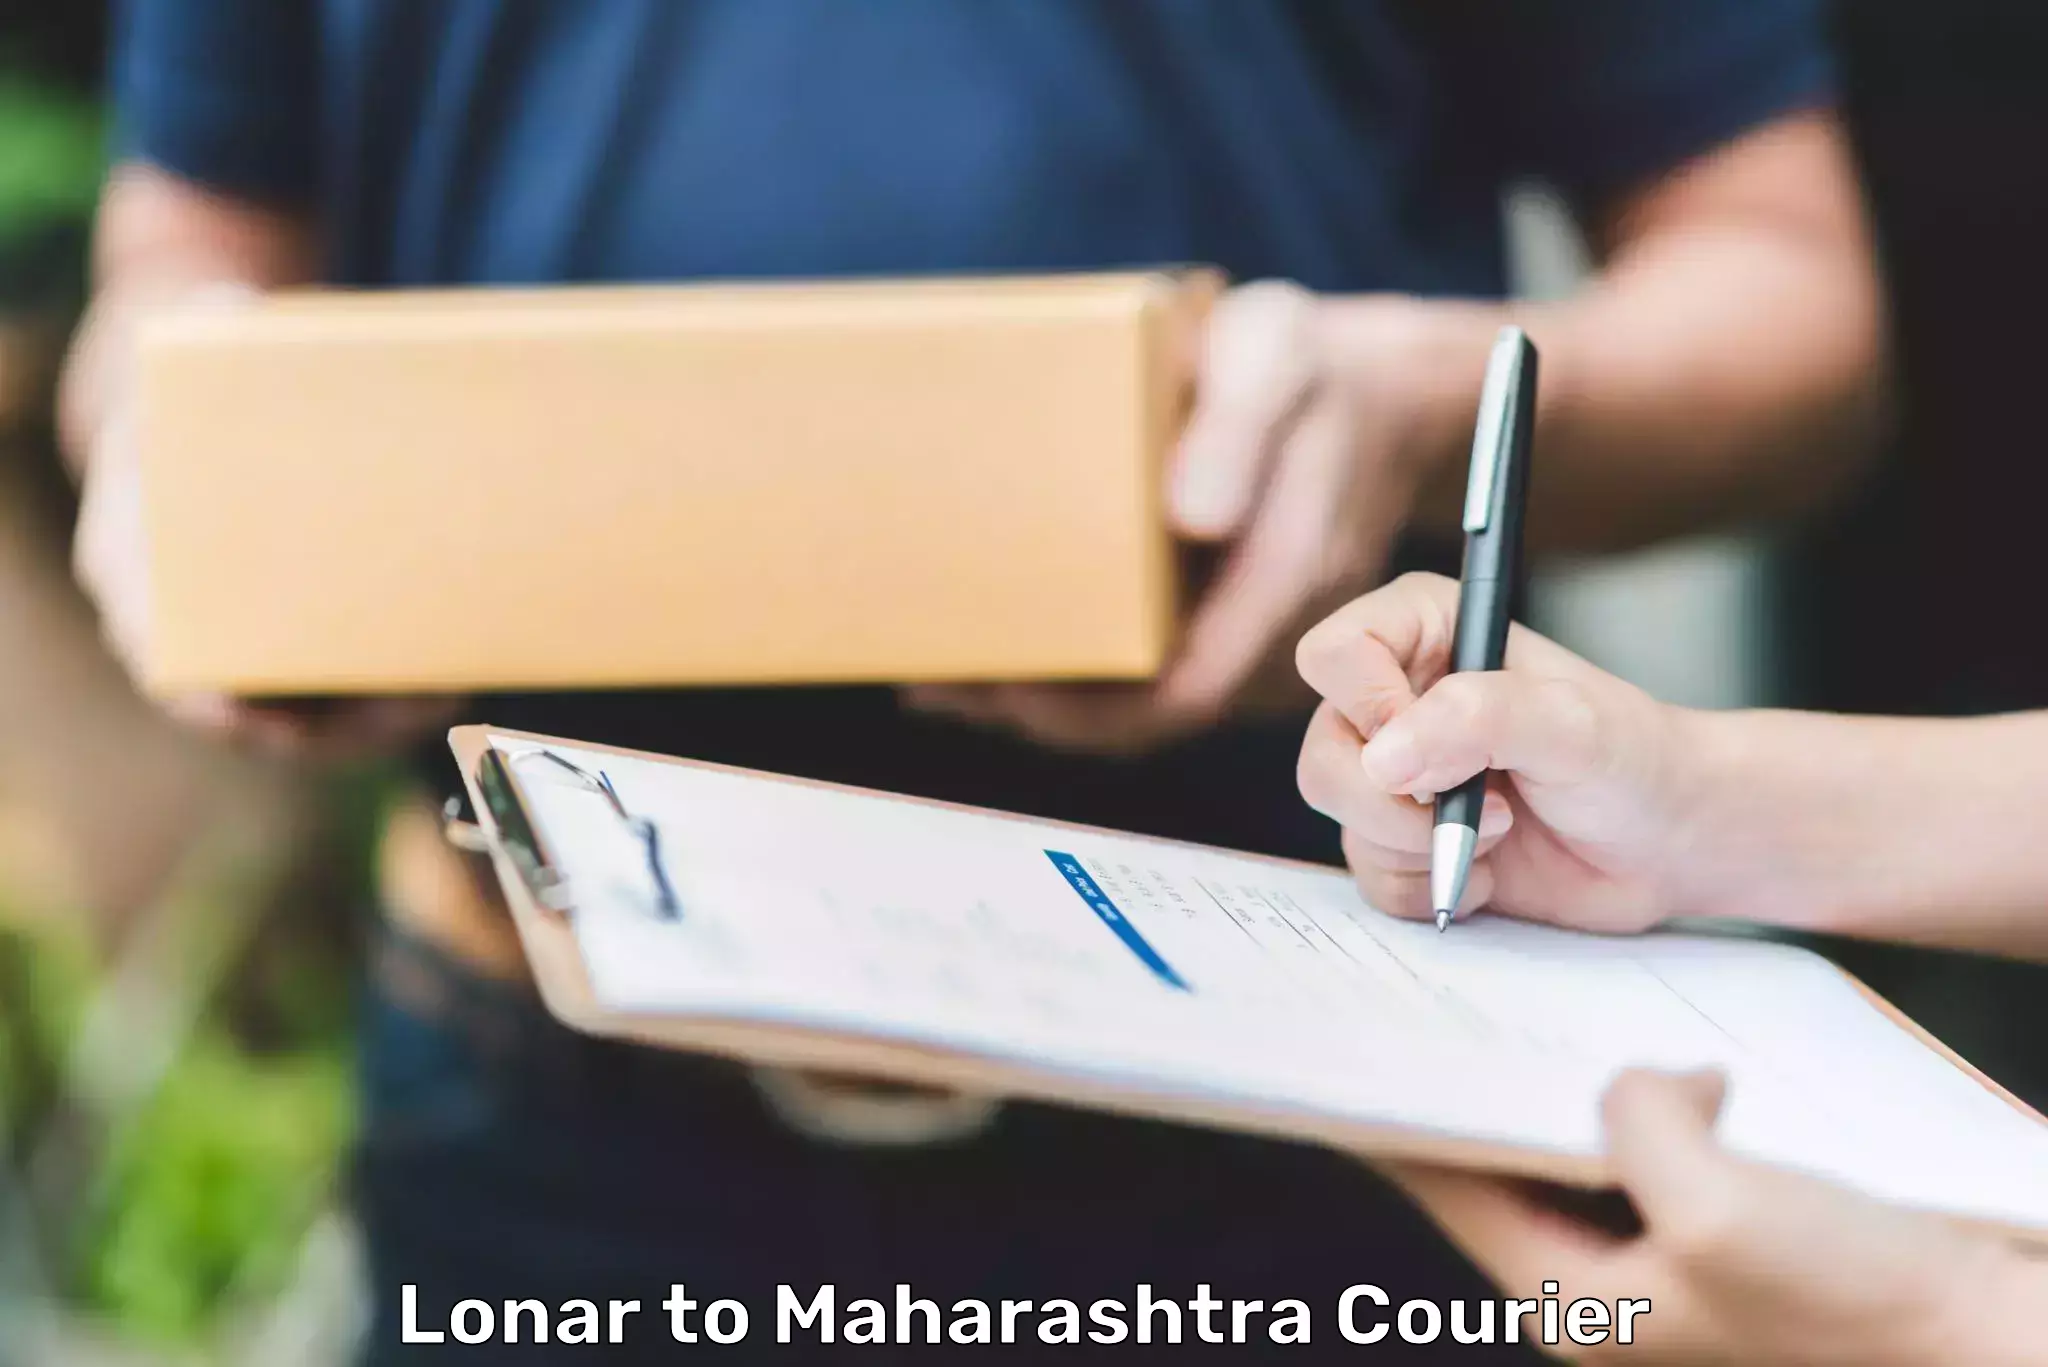 Tech-enabled shipping in Lonar to Chembur